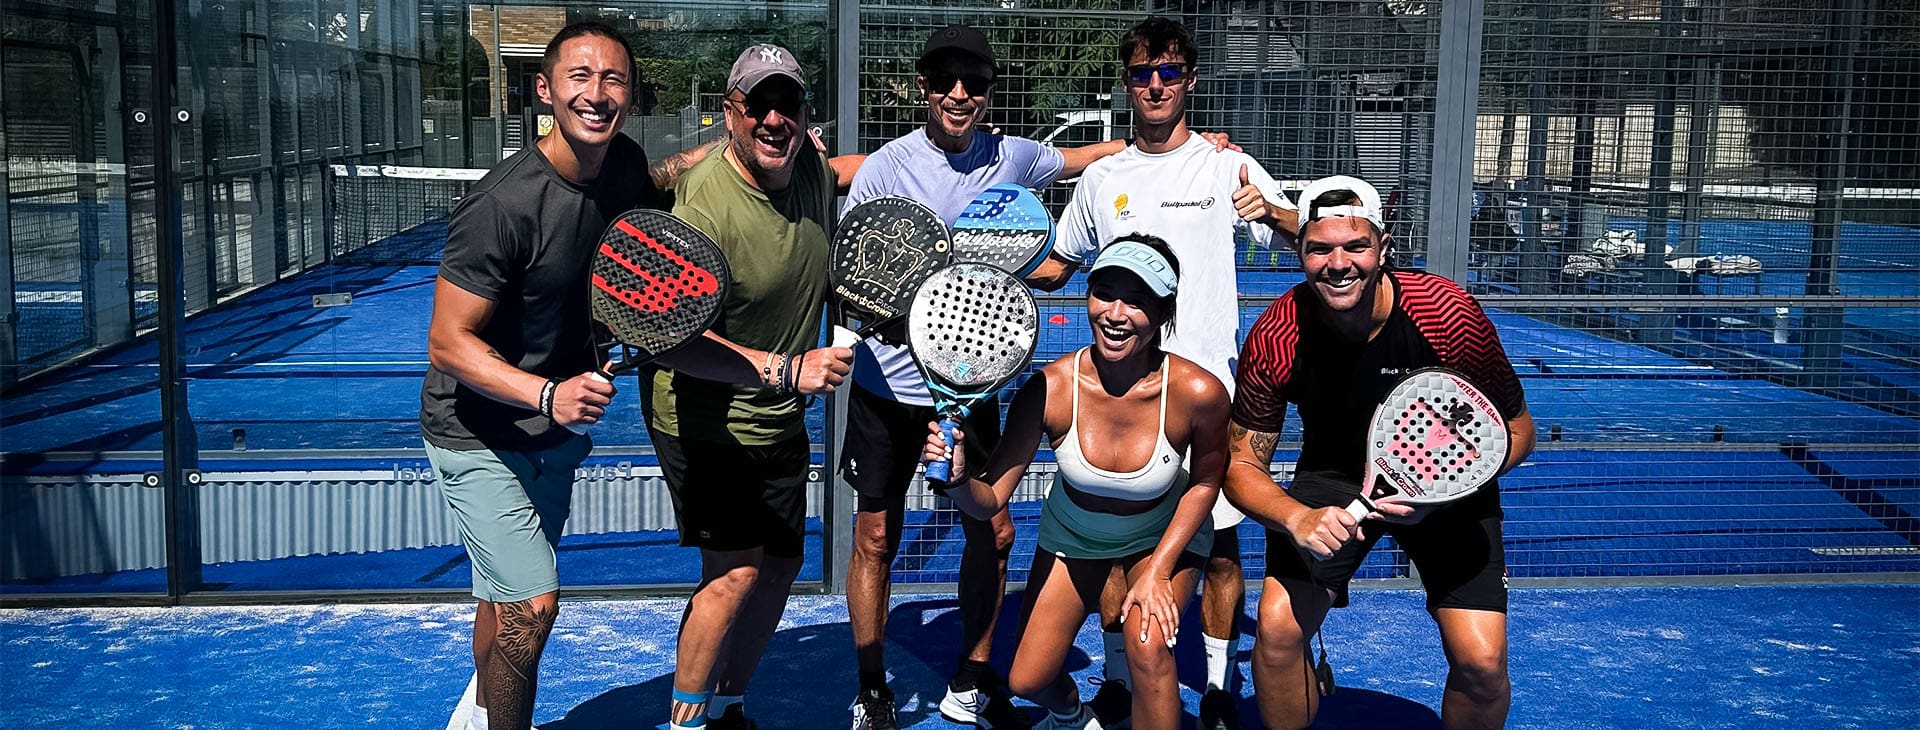 Explore the impactful highlights of Padel player actions during the Padel Clinic in the recent 3 and 5-day sessions at our Intensive Padel Academy